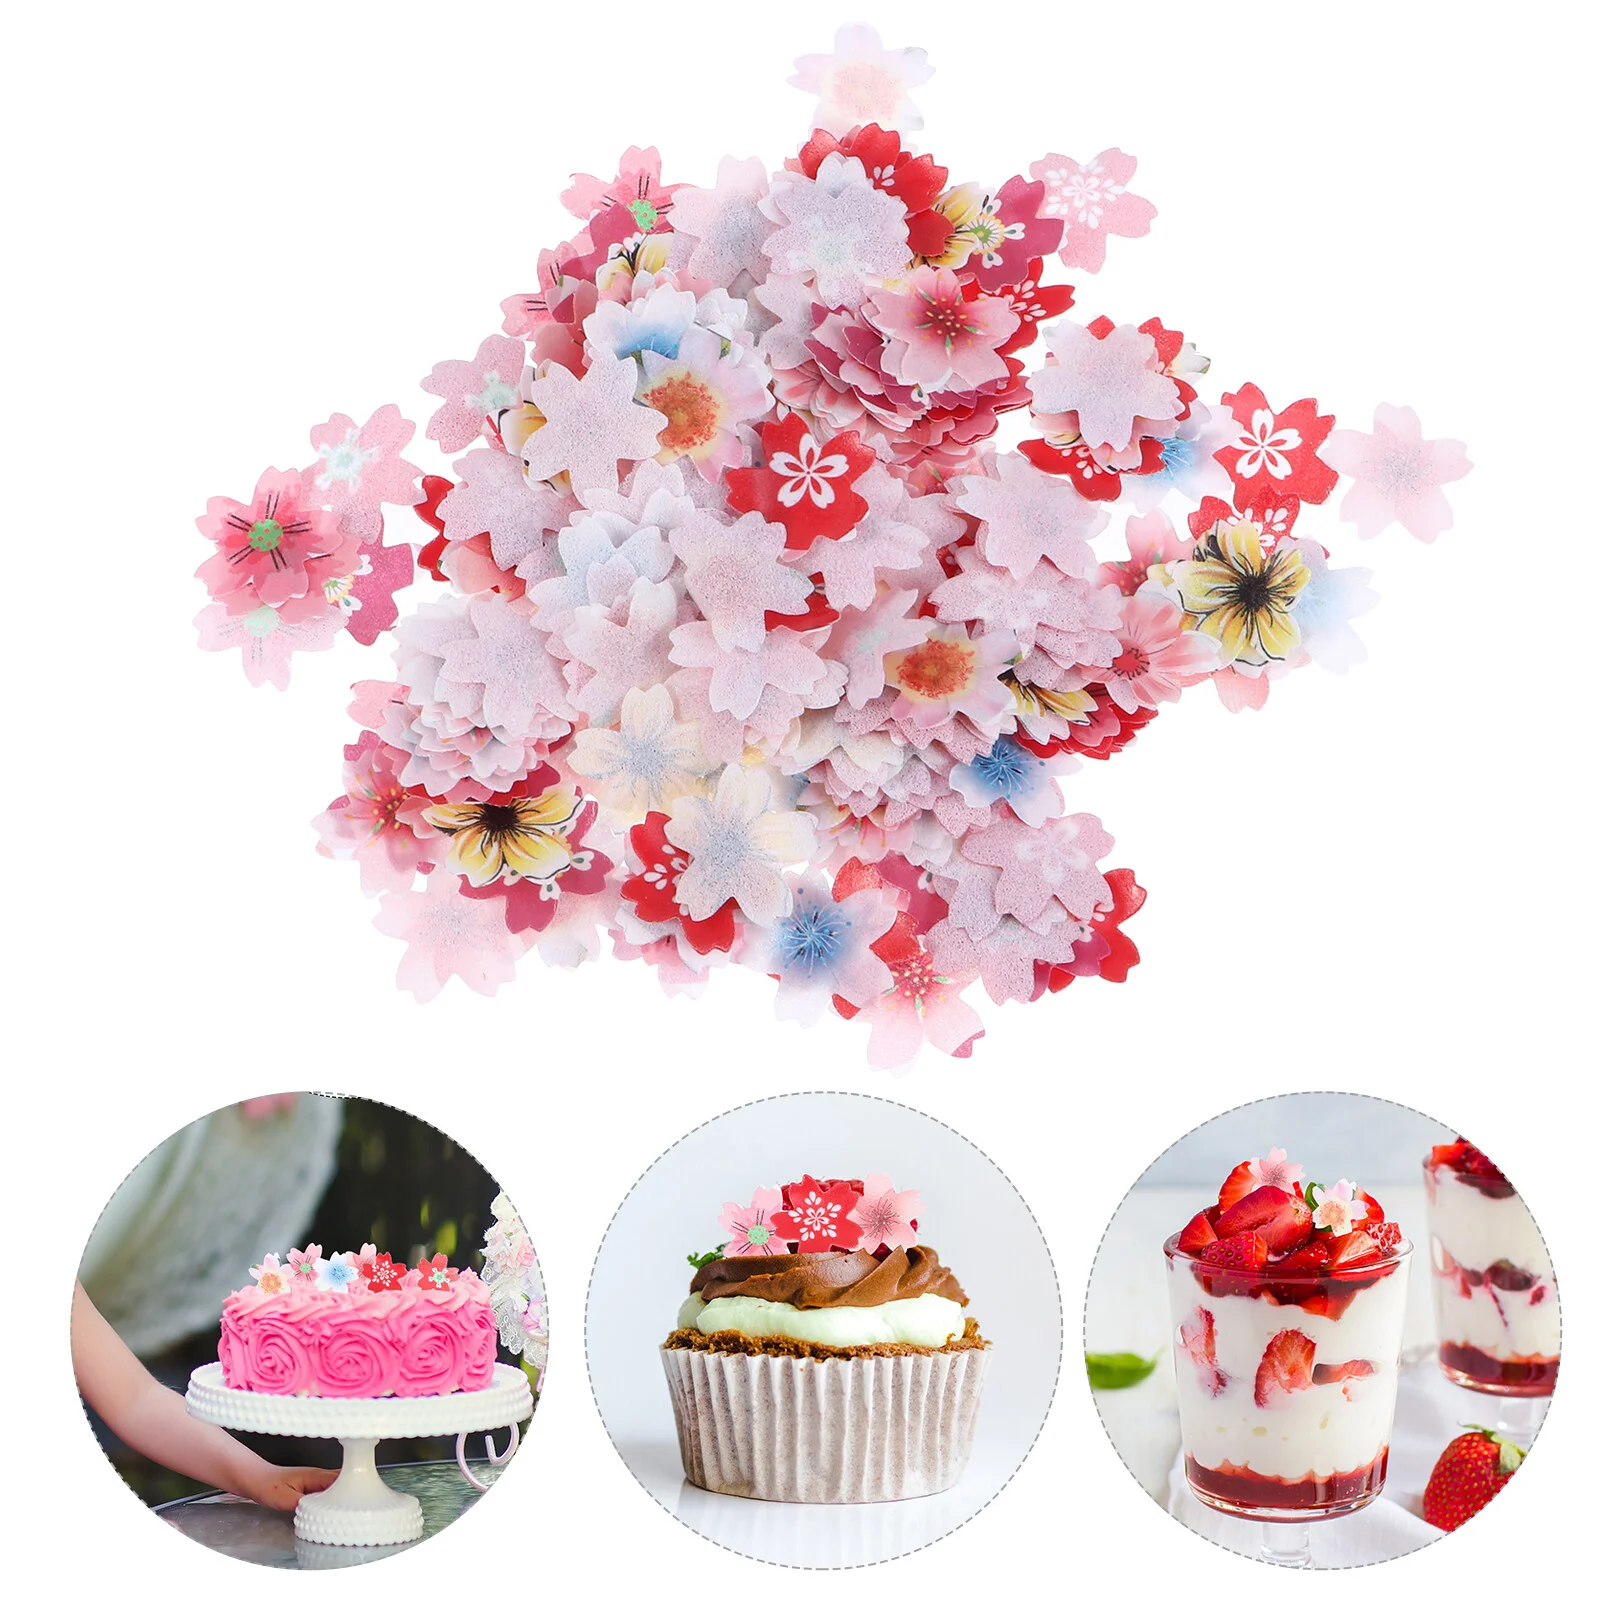 

Edible Cupcake Toppers Cake: Blossoms Flower Cake Decor Glutinous Rice Paper for Dessert Donut Pastry Decor 440pcs Assorted